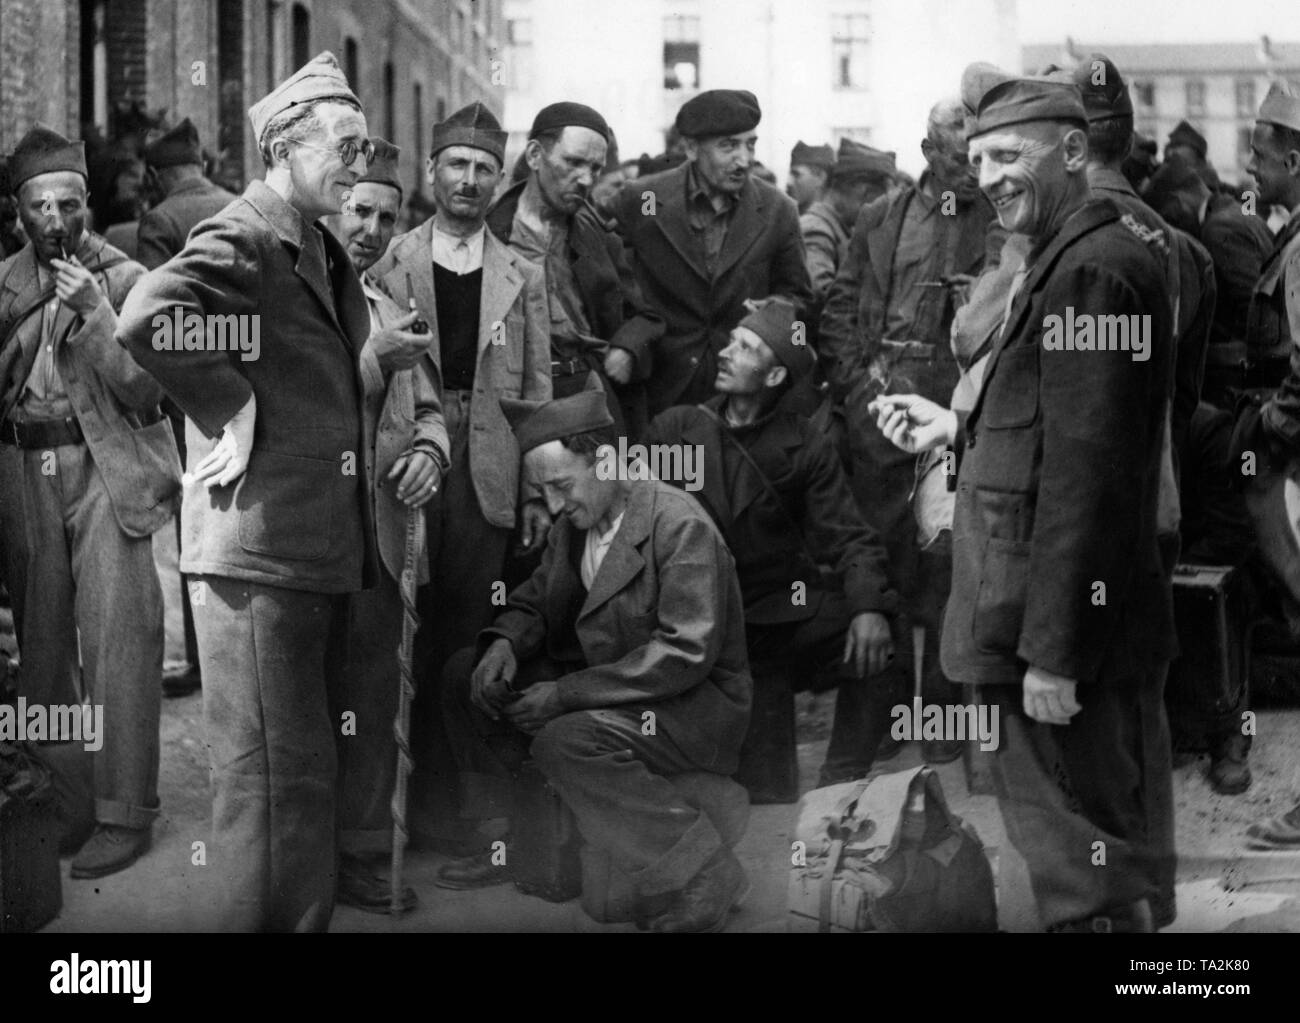 French prisoners of war, who have been released for health reasons from captivity and are now being repatriated, arrive in Chalon-sur-Saone at the Franco-German demarcation lines. Stock Photo